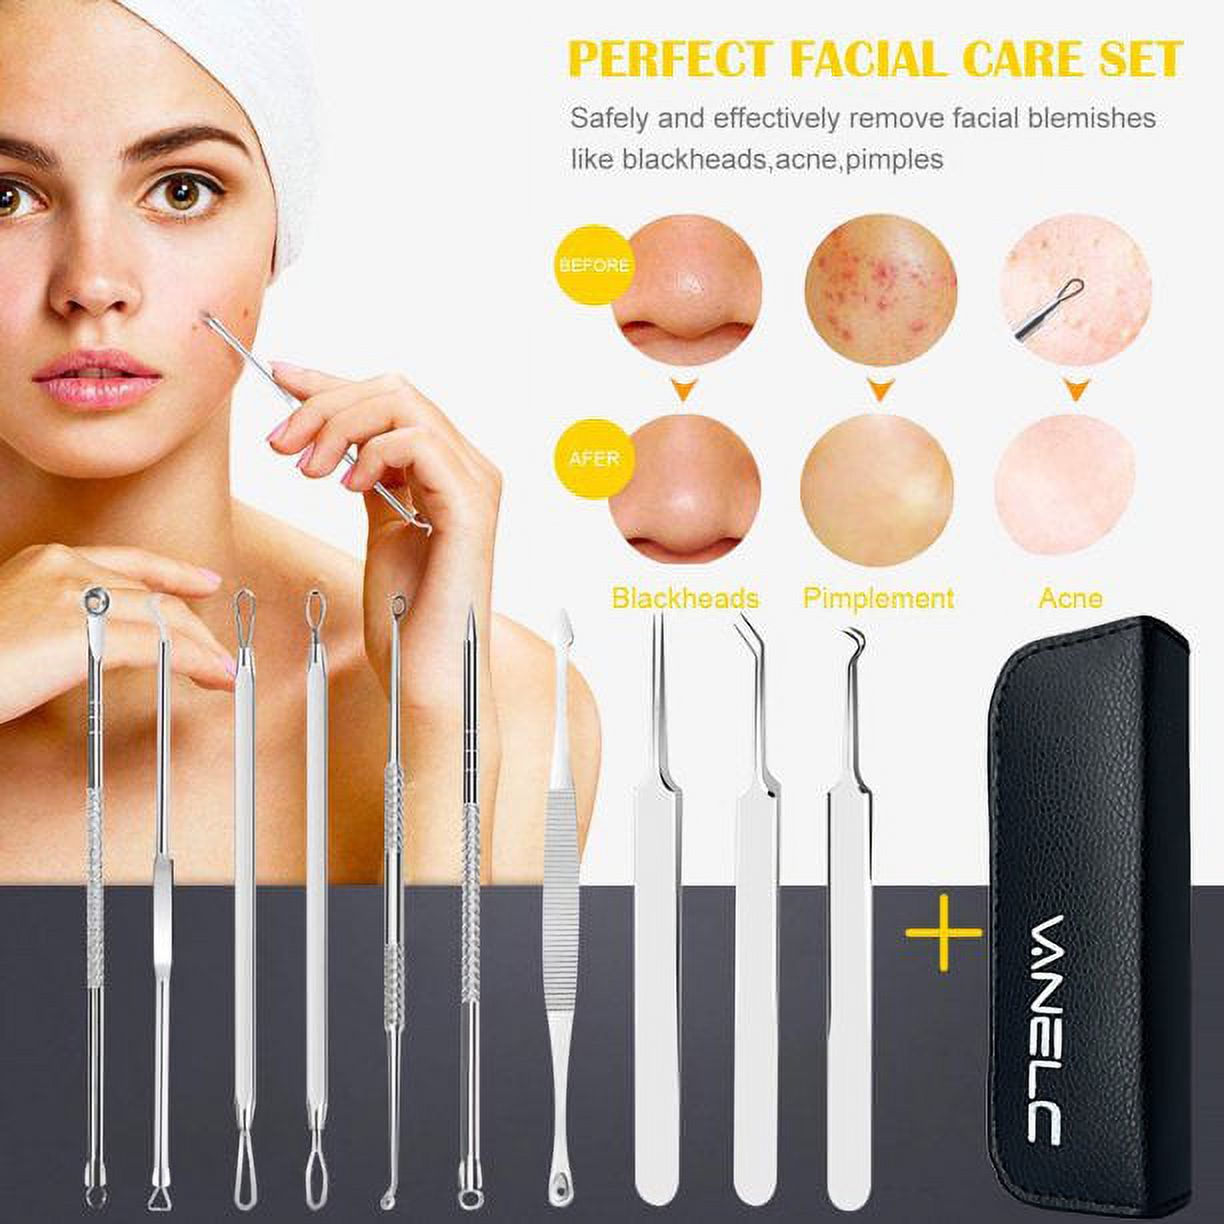 Blackhead Remover Tool, 10 Pcs Professional Pimple Comedone Extractor Popper Tool Acne Removal Kit - Treatment for Pimples, Blackheads, Zit Removing, Forehead,Facial and Nose(Silver) - image 8 of 8